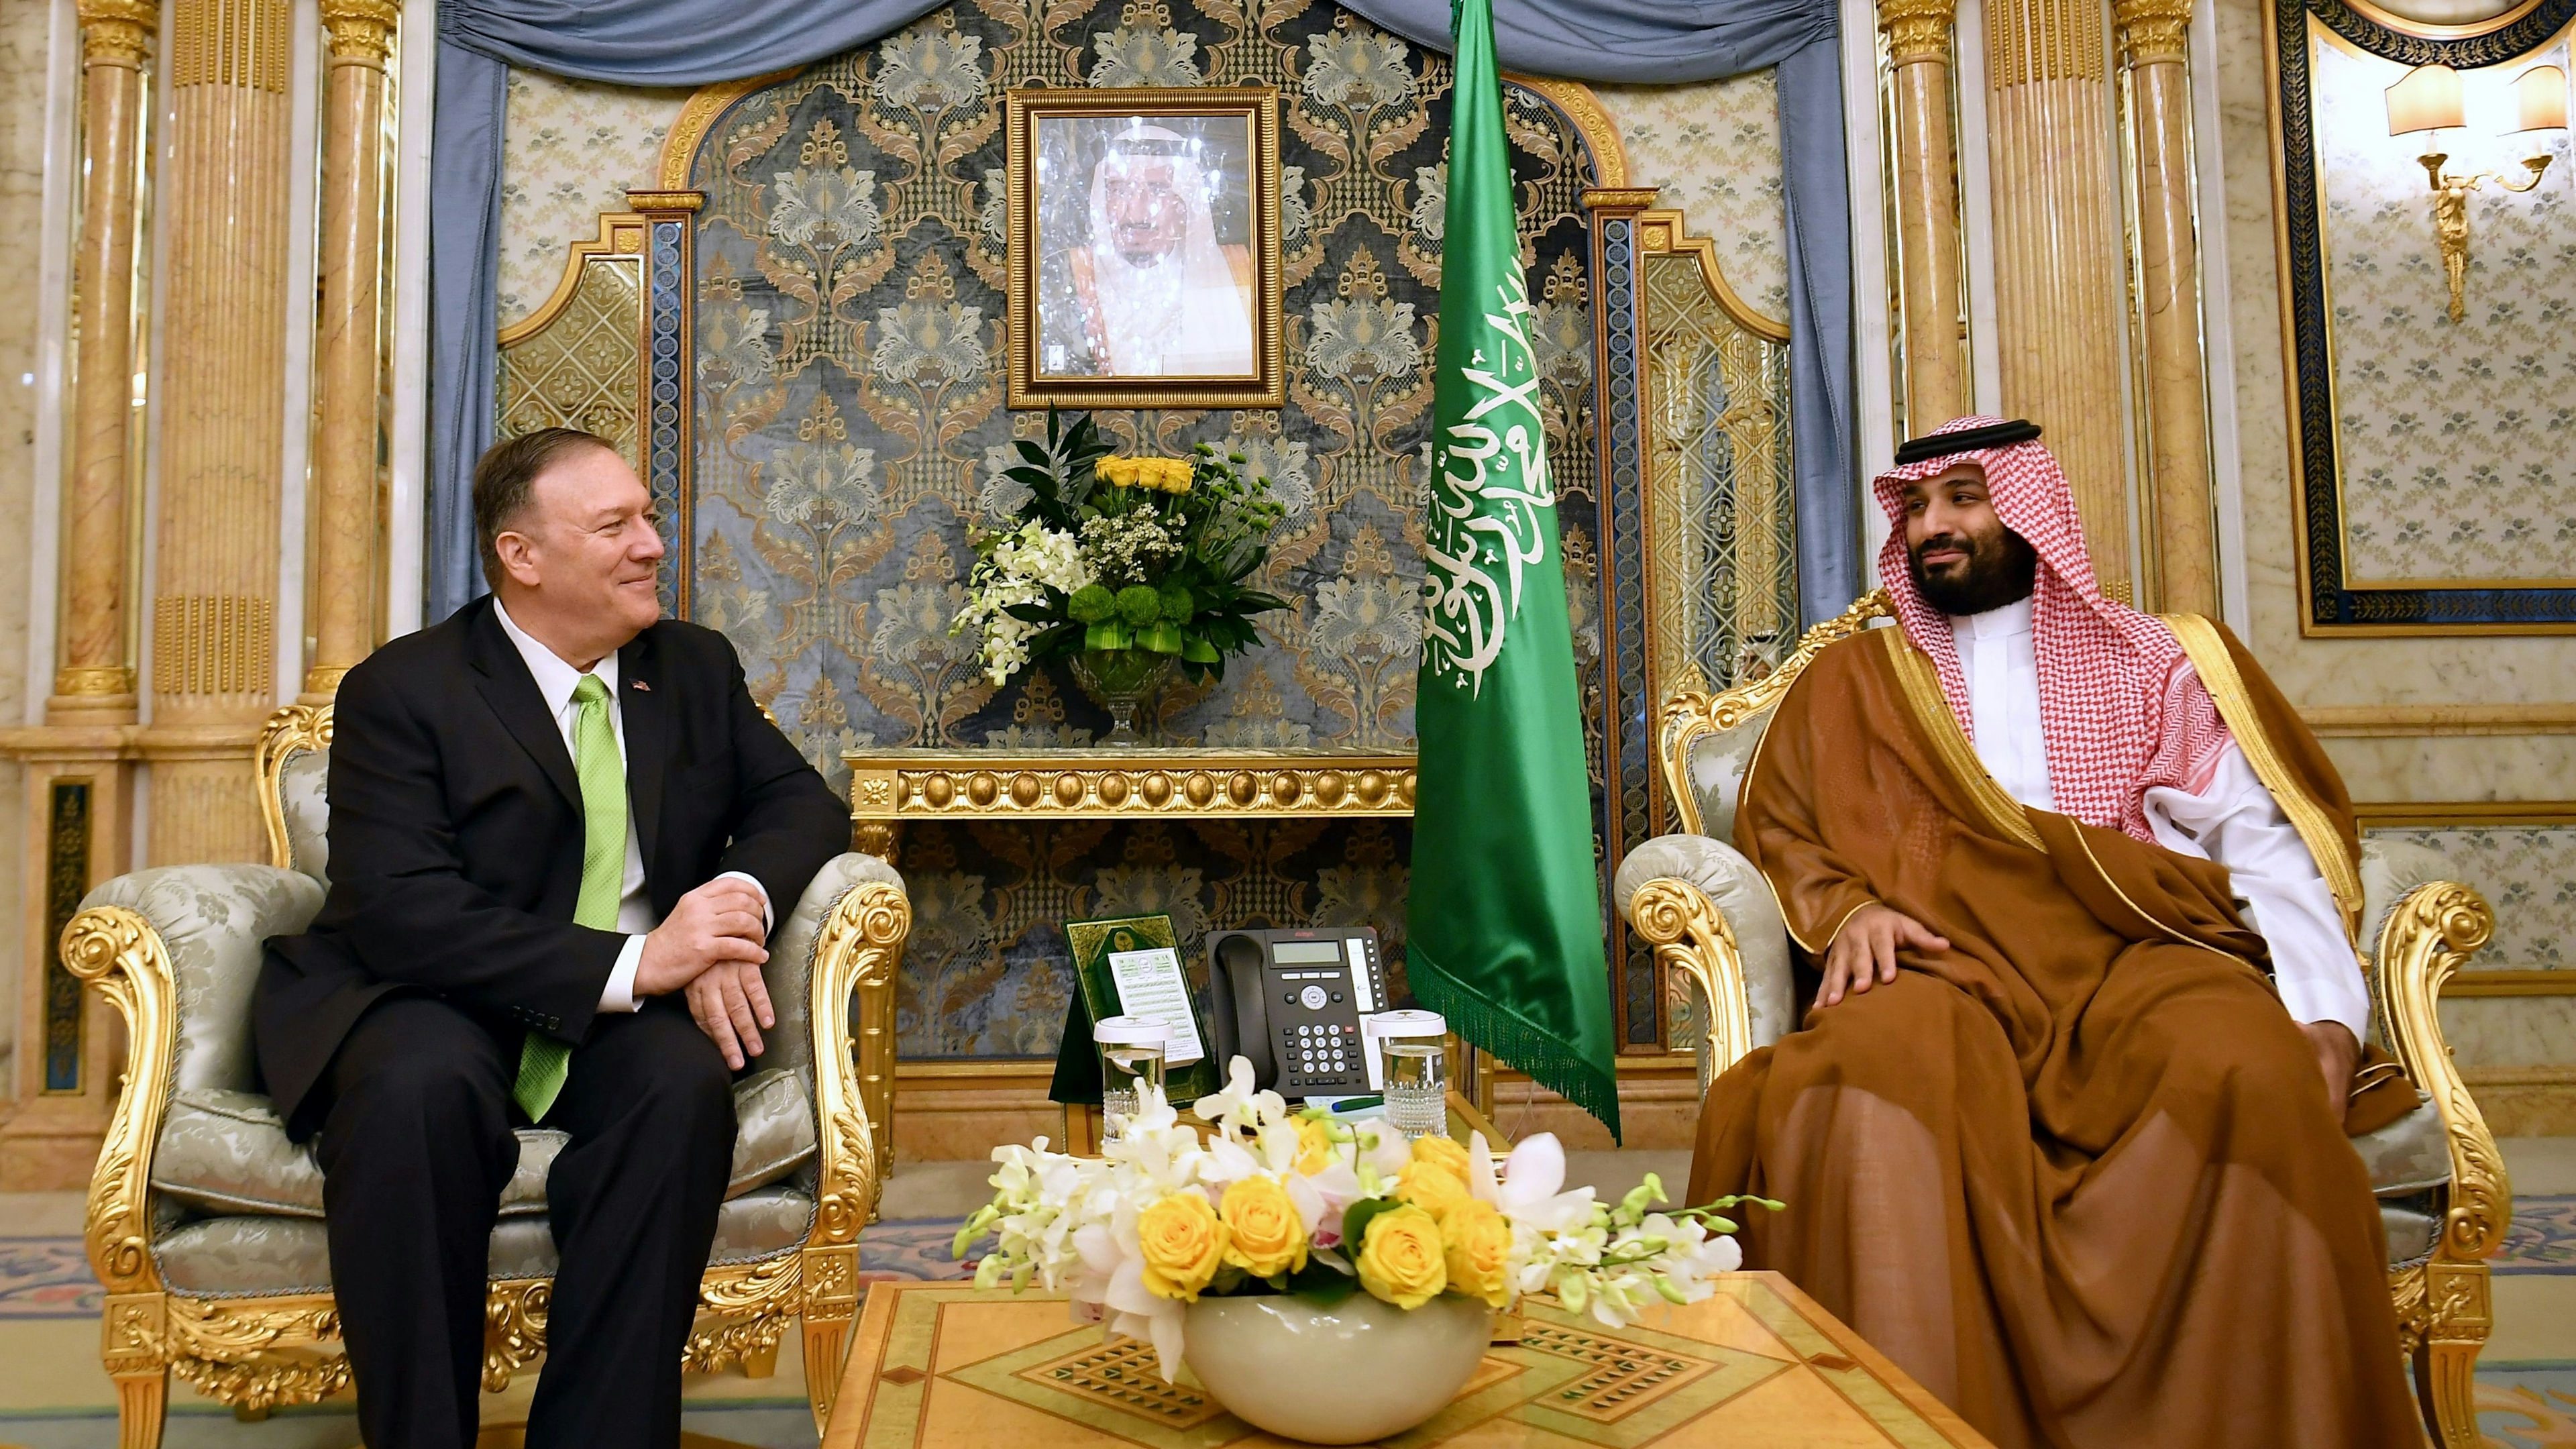 Pompeo and MBS